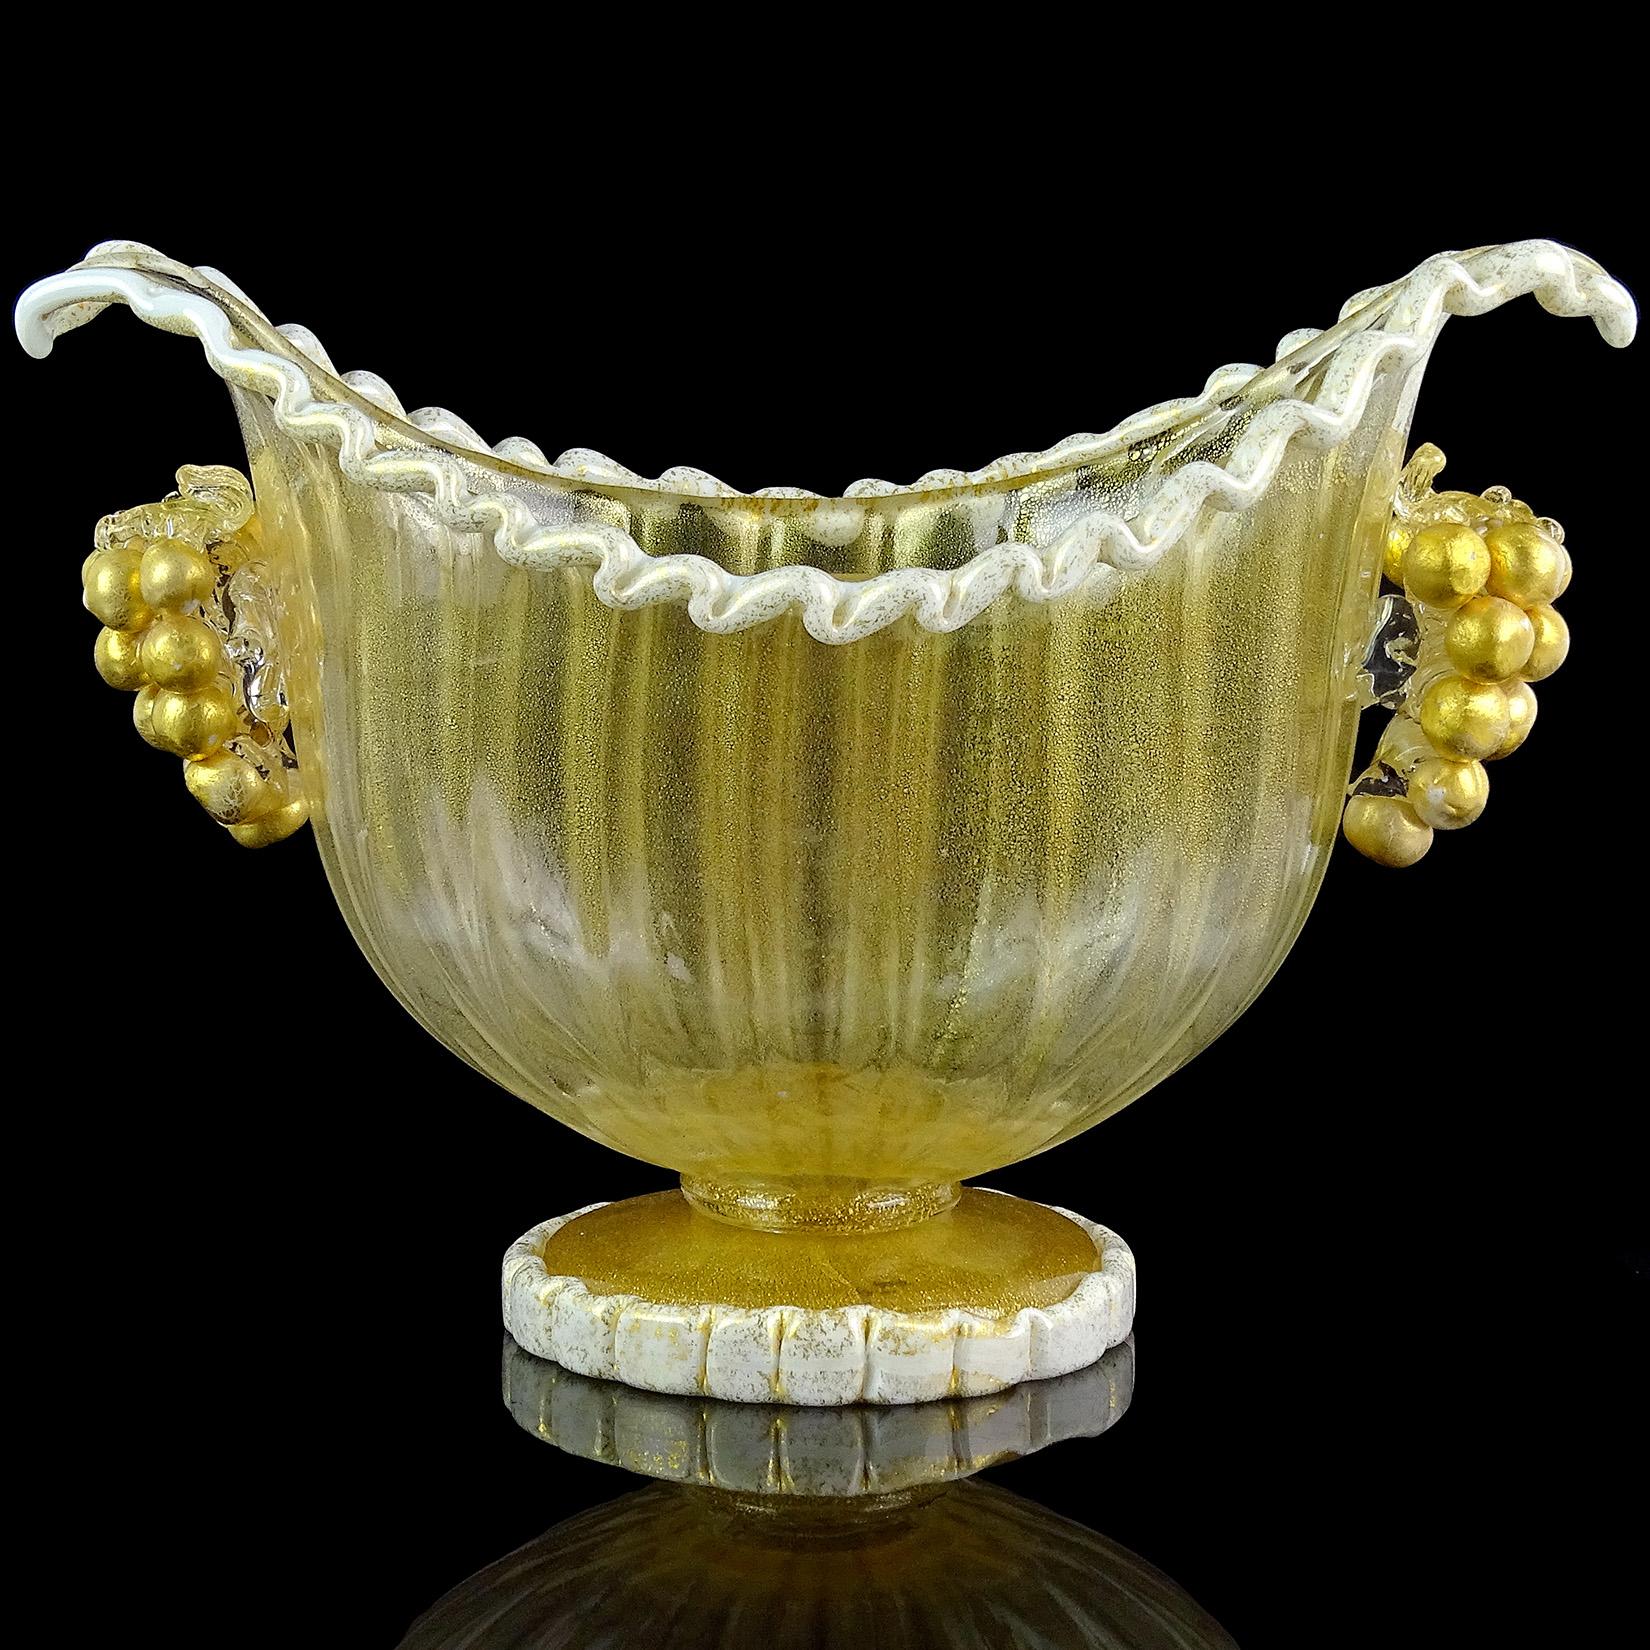 Gorgeous vintage Murano hand blown, white and gold flecks with grape decoration Italian art glass compote bowl / vase. Documented to Ercole Barovier for the Barovier e Toso company, circa 1930s-1940s. Profusely covered in gold leaf throughout. The